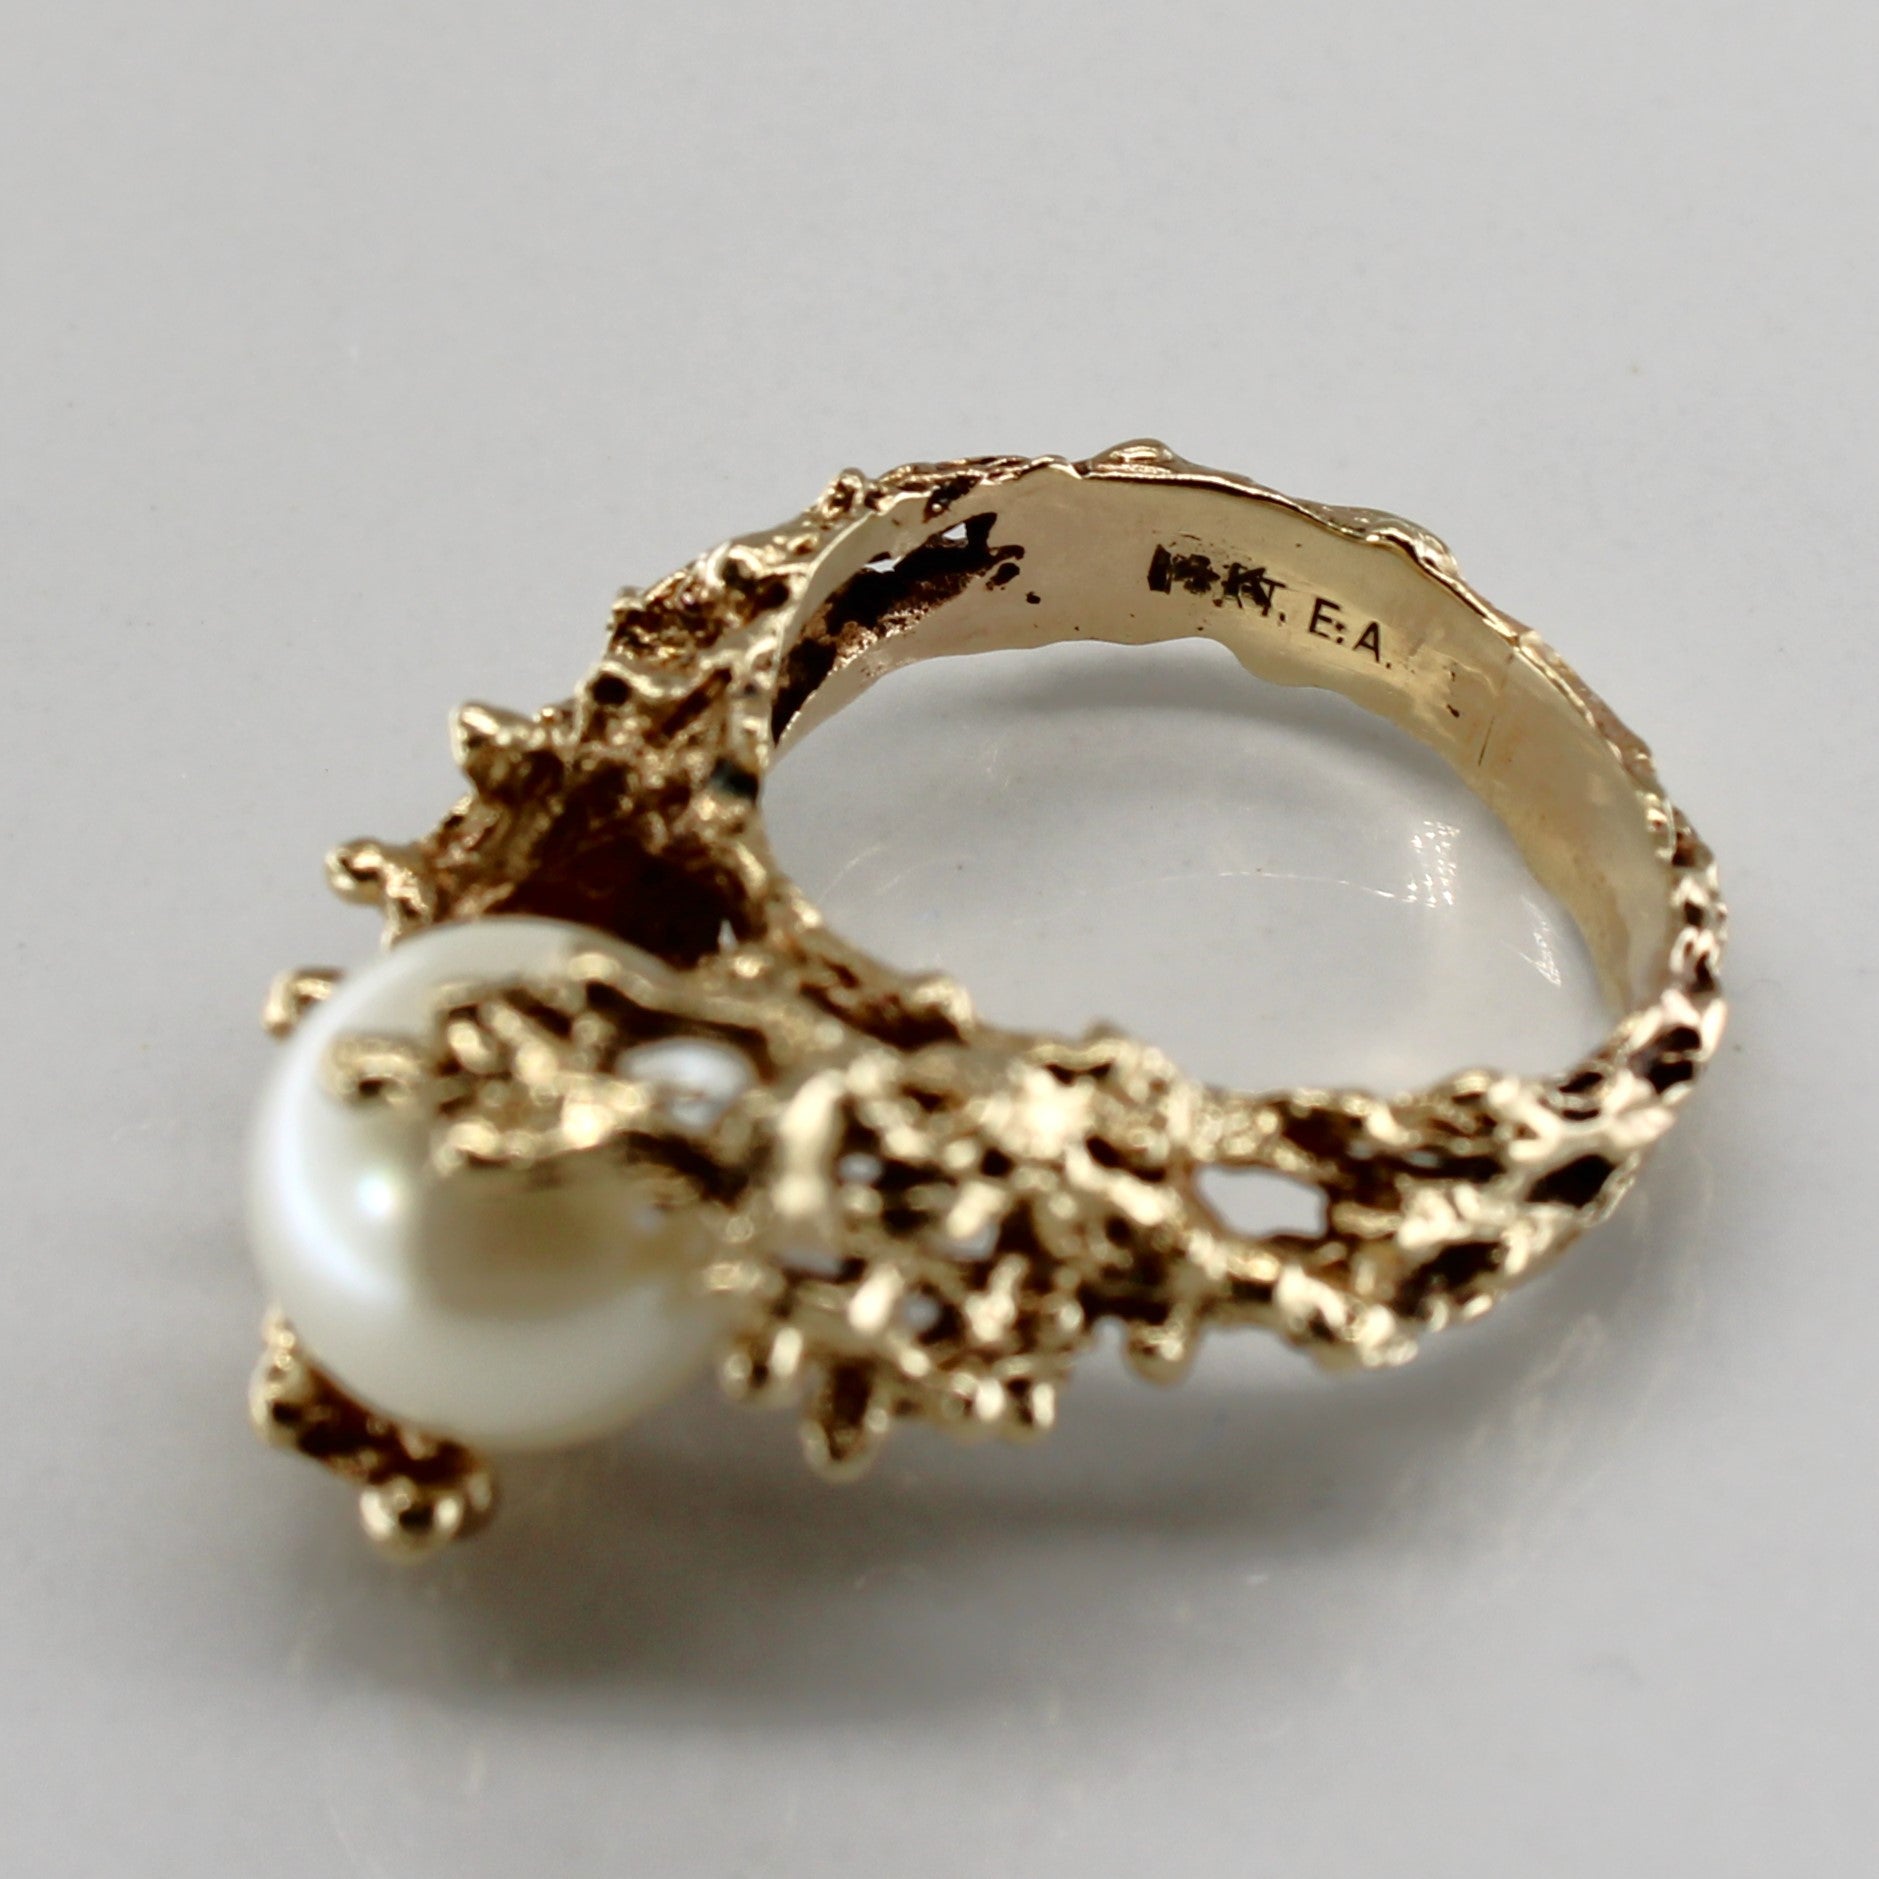 Pearl Bypass Seaweed 14k Ring | SZ 4.5 |